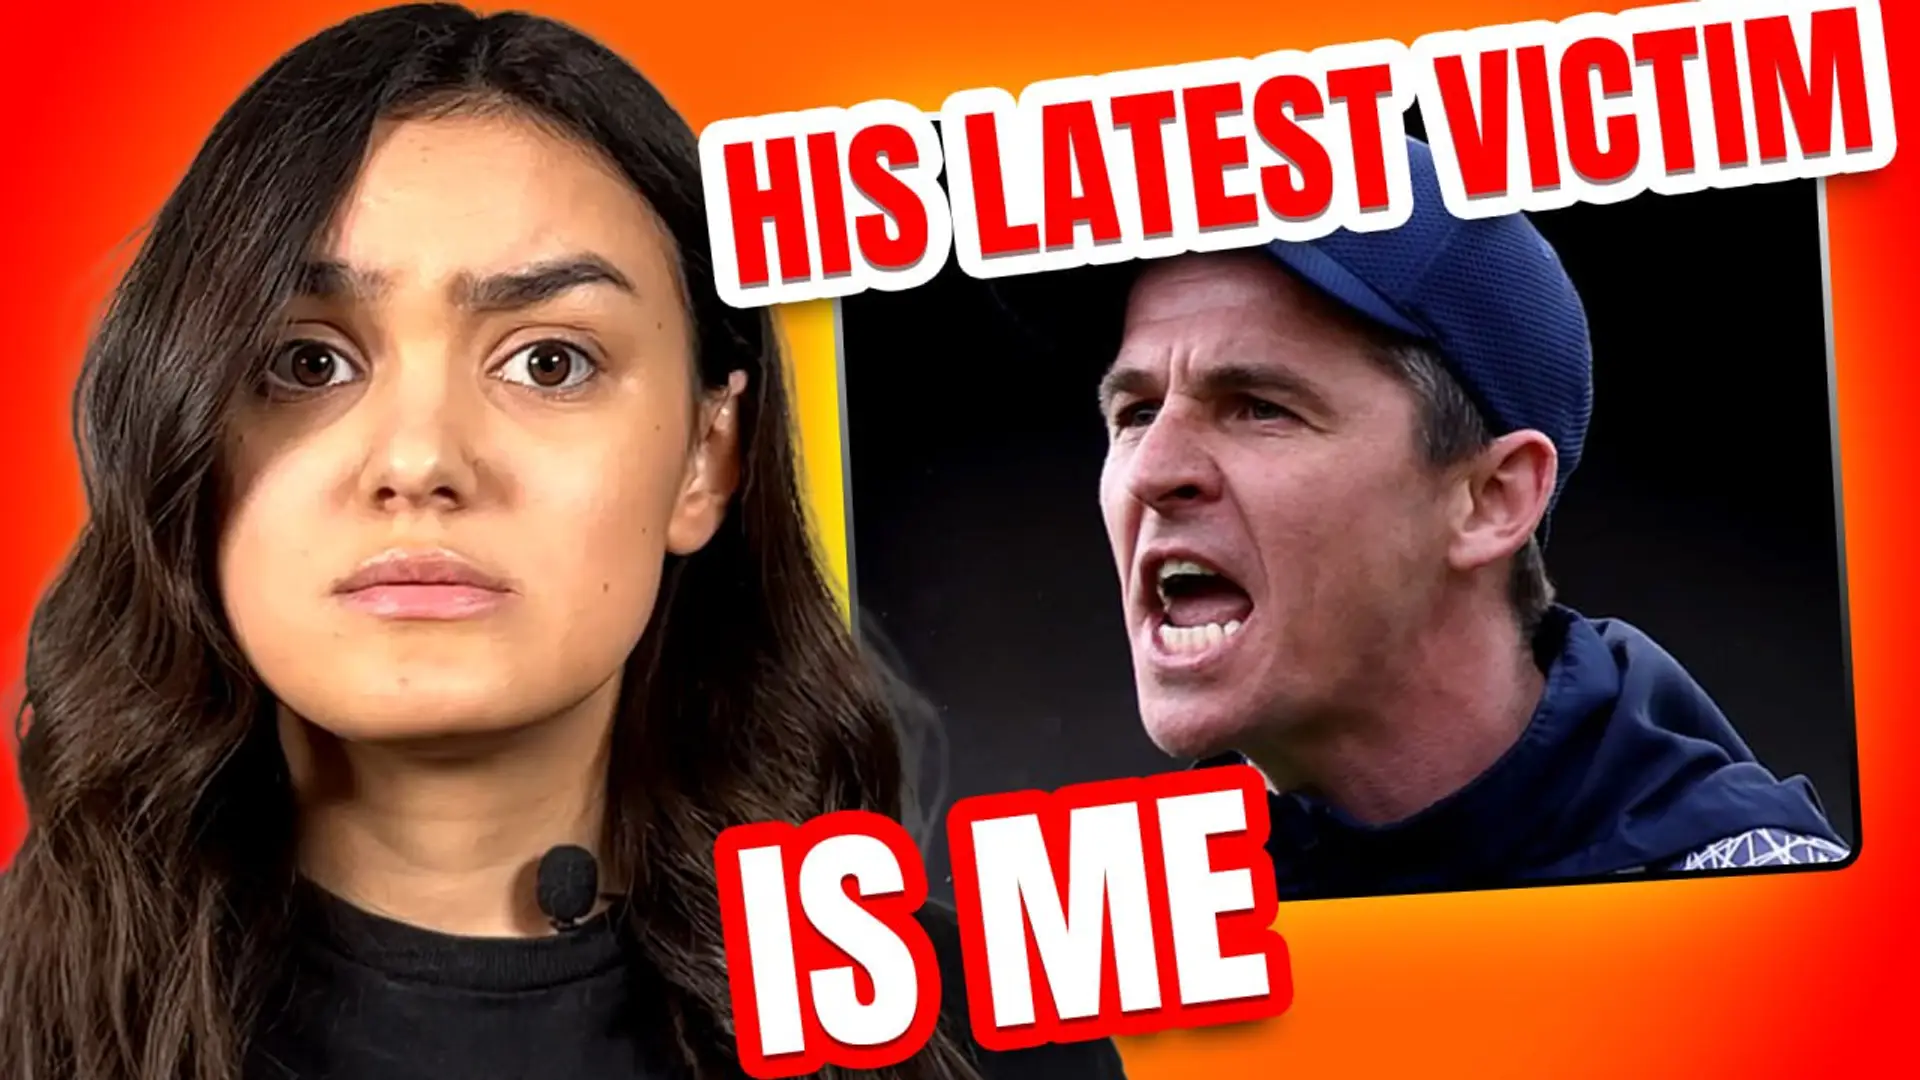 Joey Barton, what's wrong with you? (video)